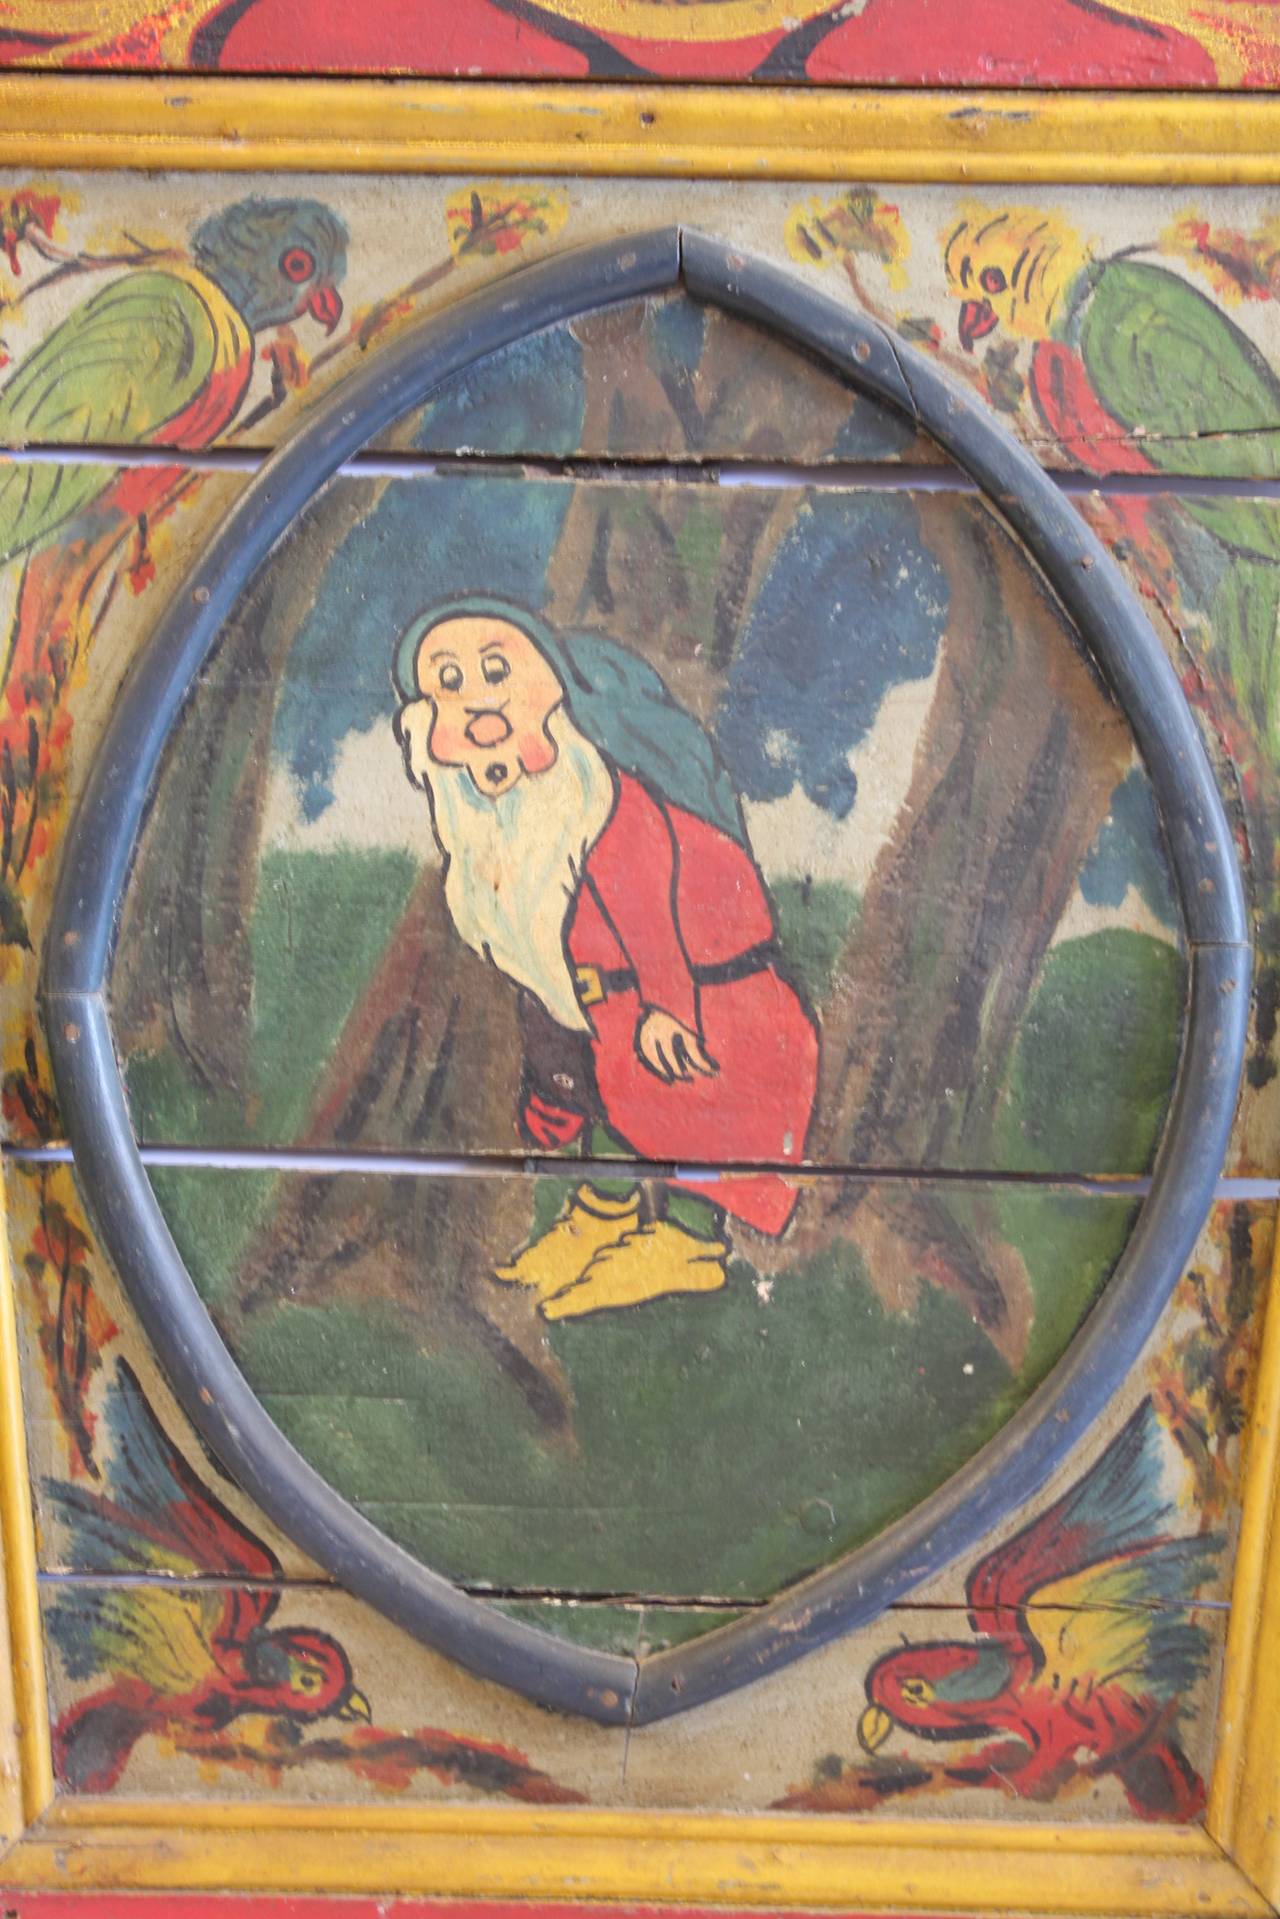 1940s carnival ride door with a snow white scene.
Hanging hardware attached on the back